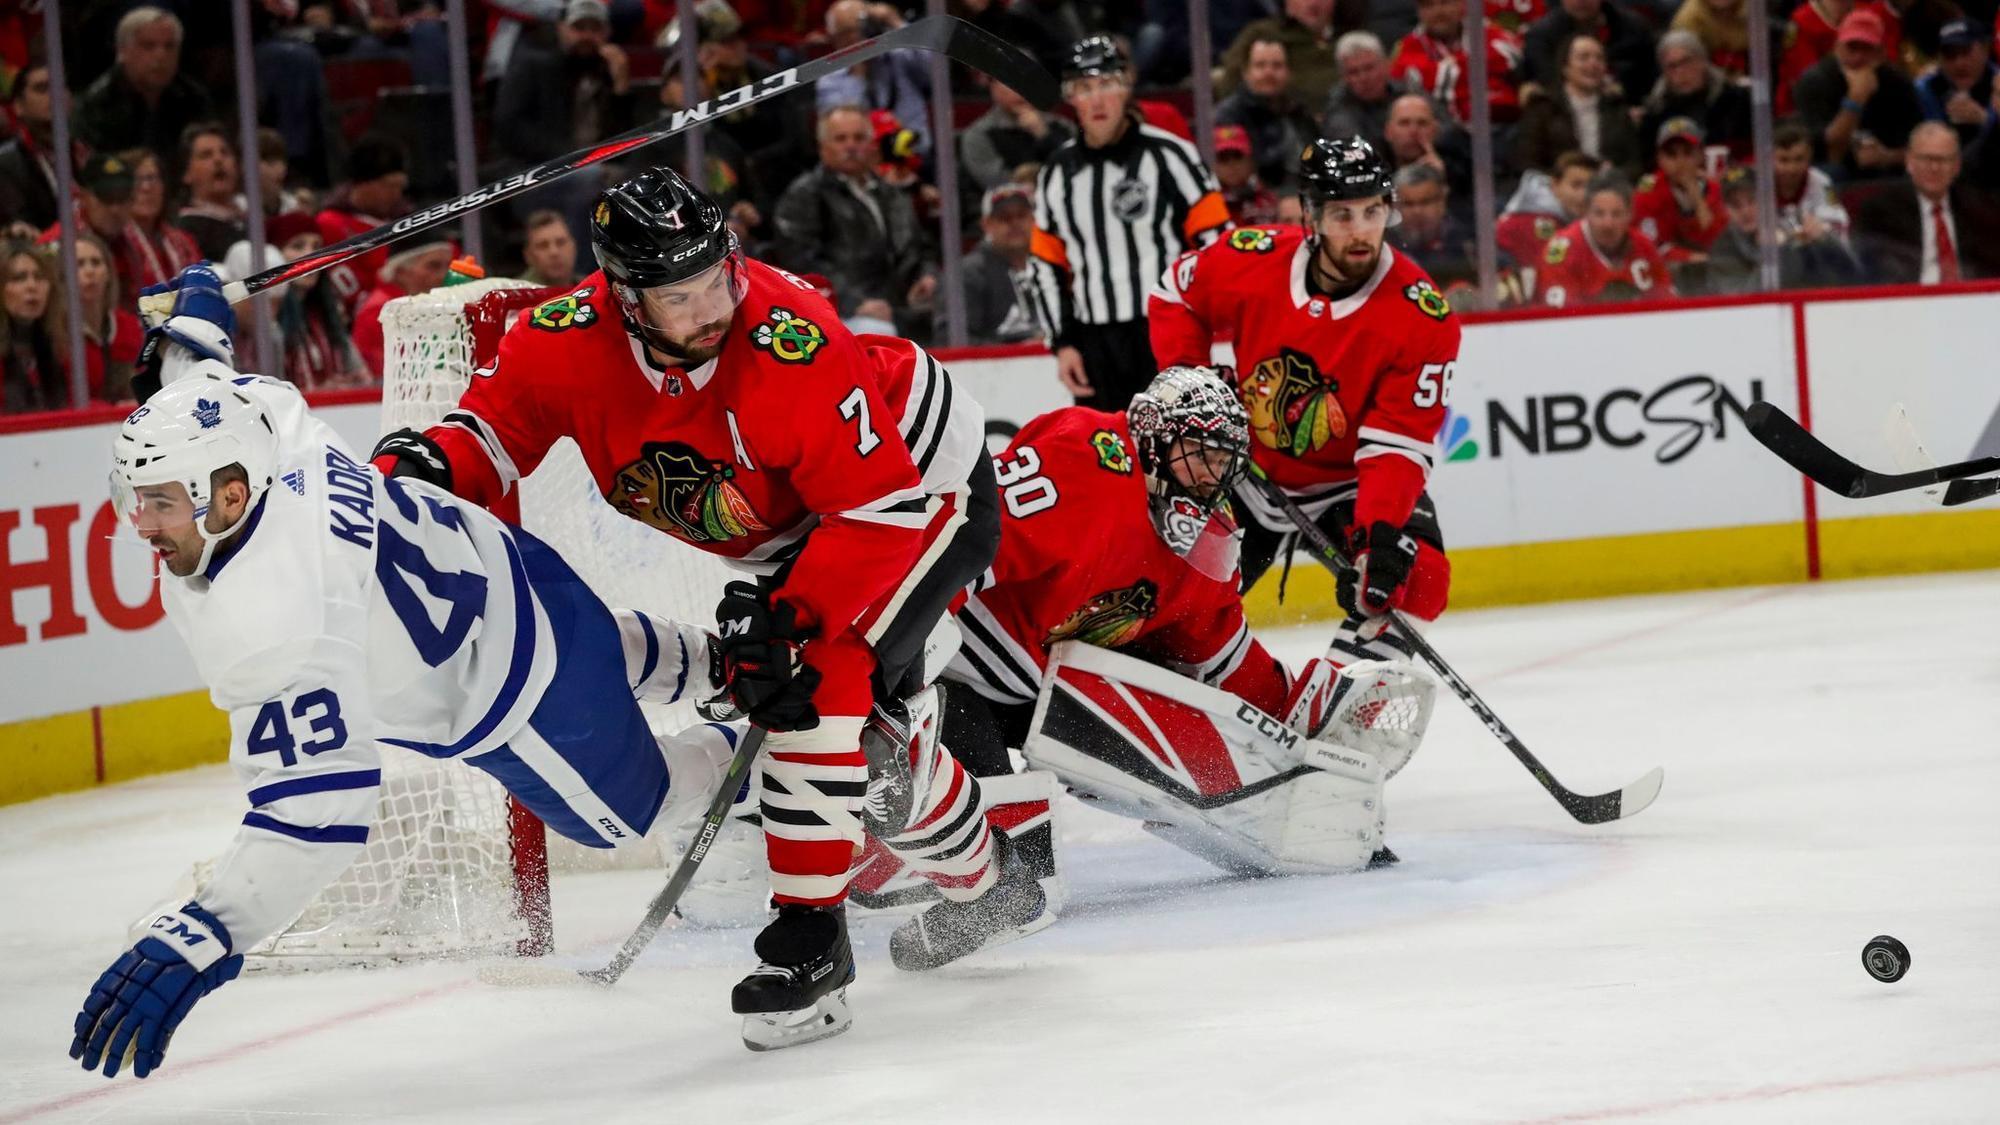 Blackhawks finish homestand 1-4-1: 'We put ourselves in a tremendous hole'